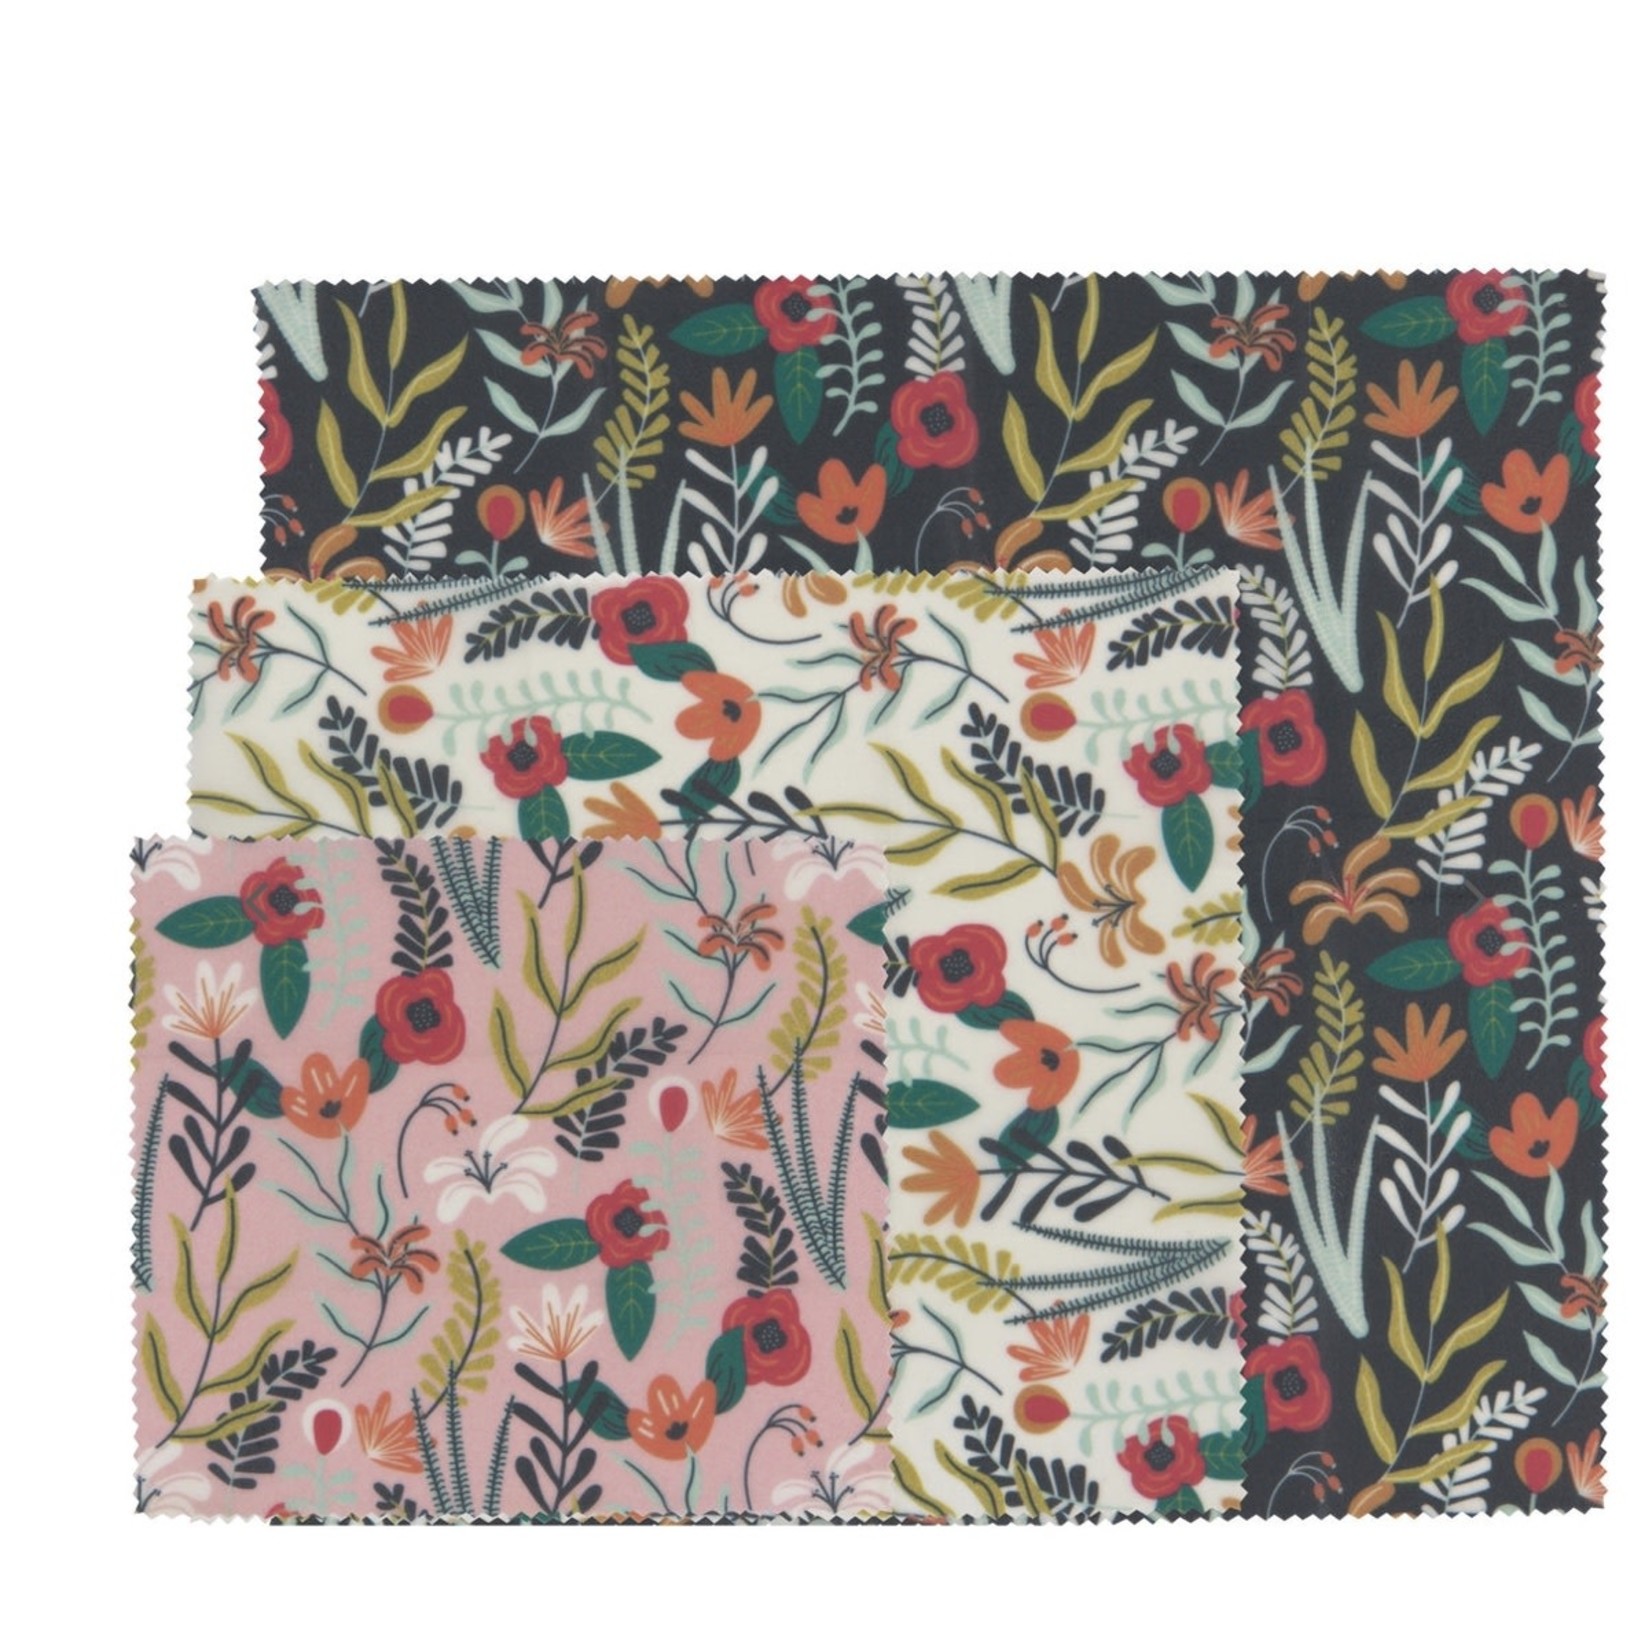 ECOLOGIE ECOLOGIE Beeswax Wraps S/3 - Floral